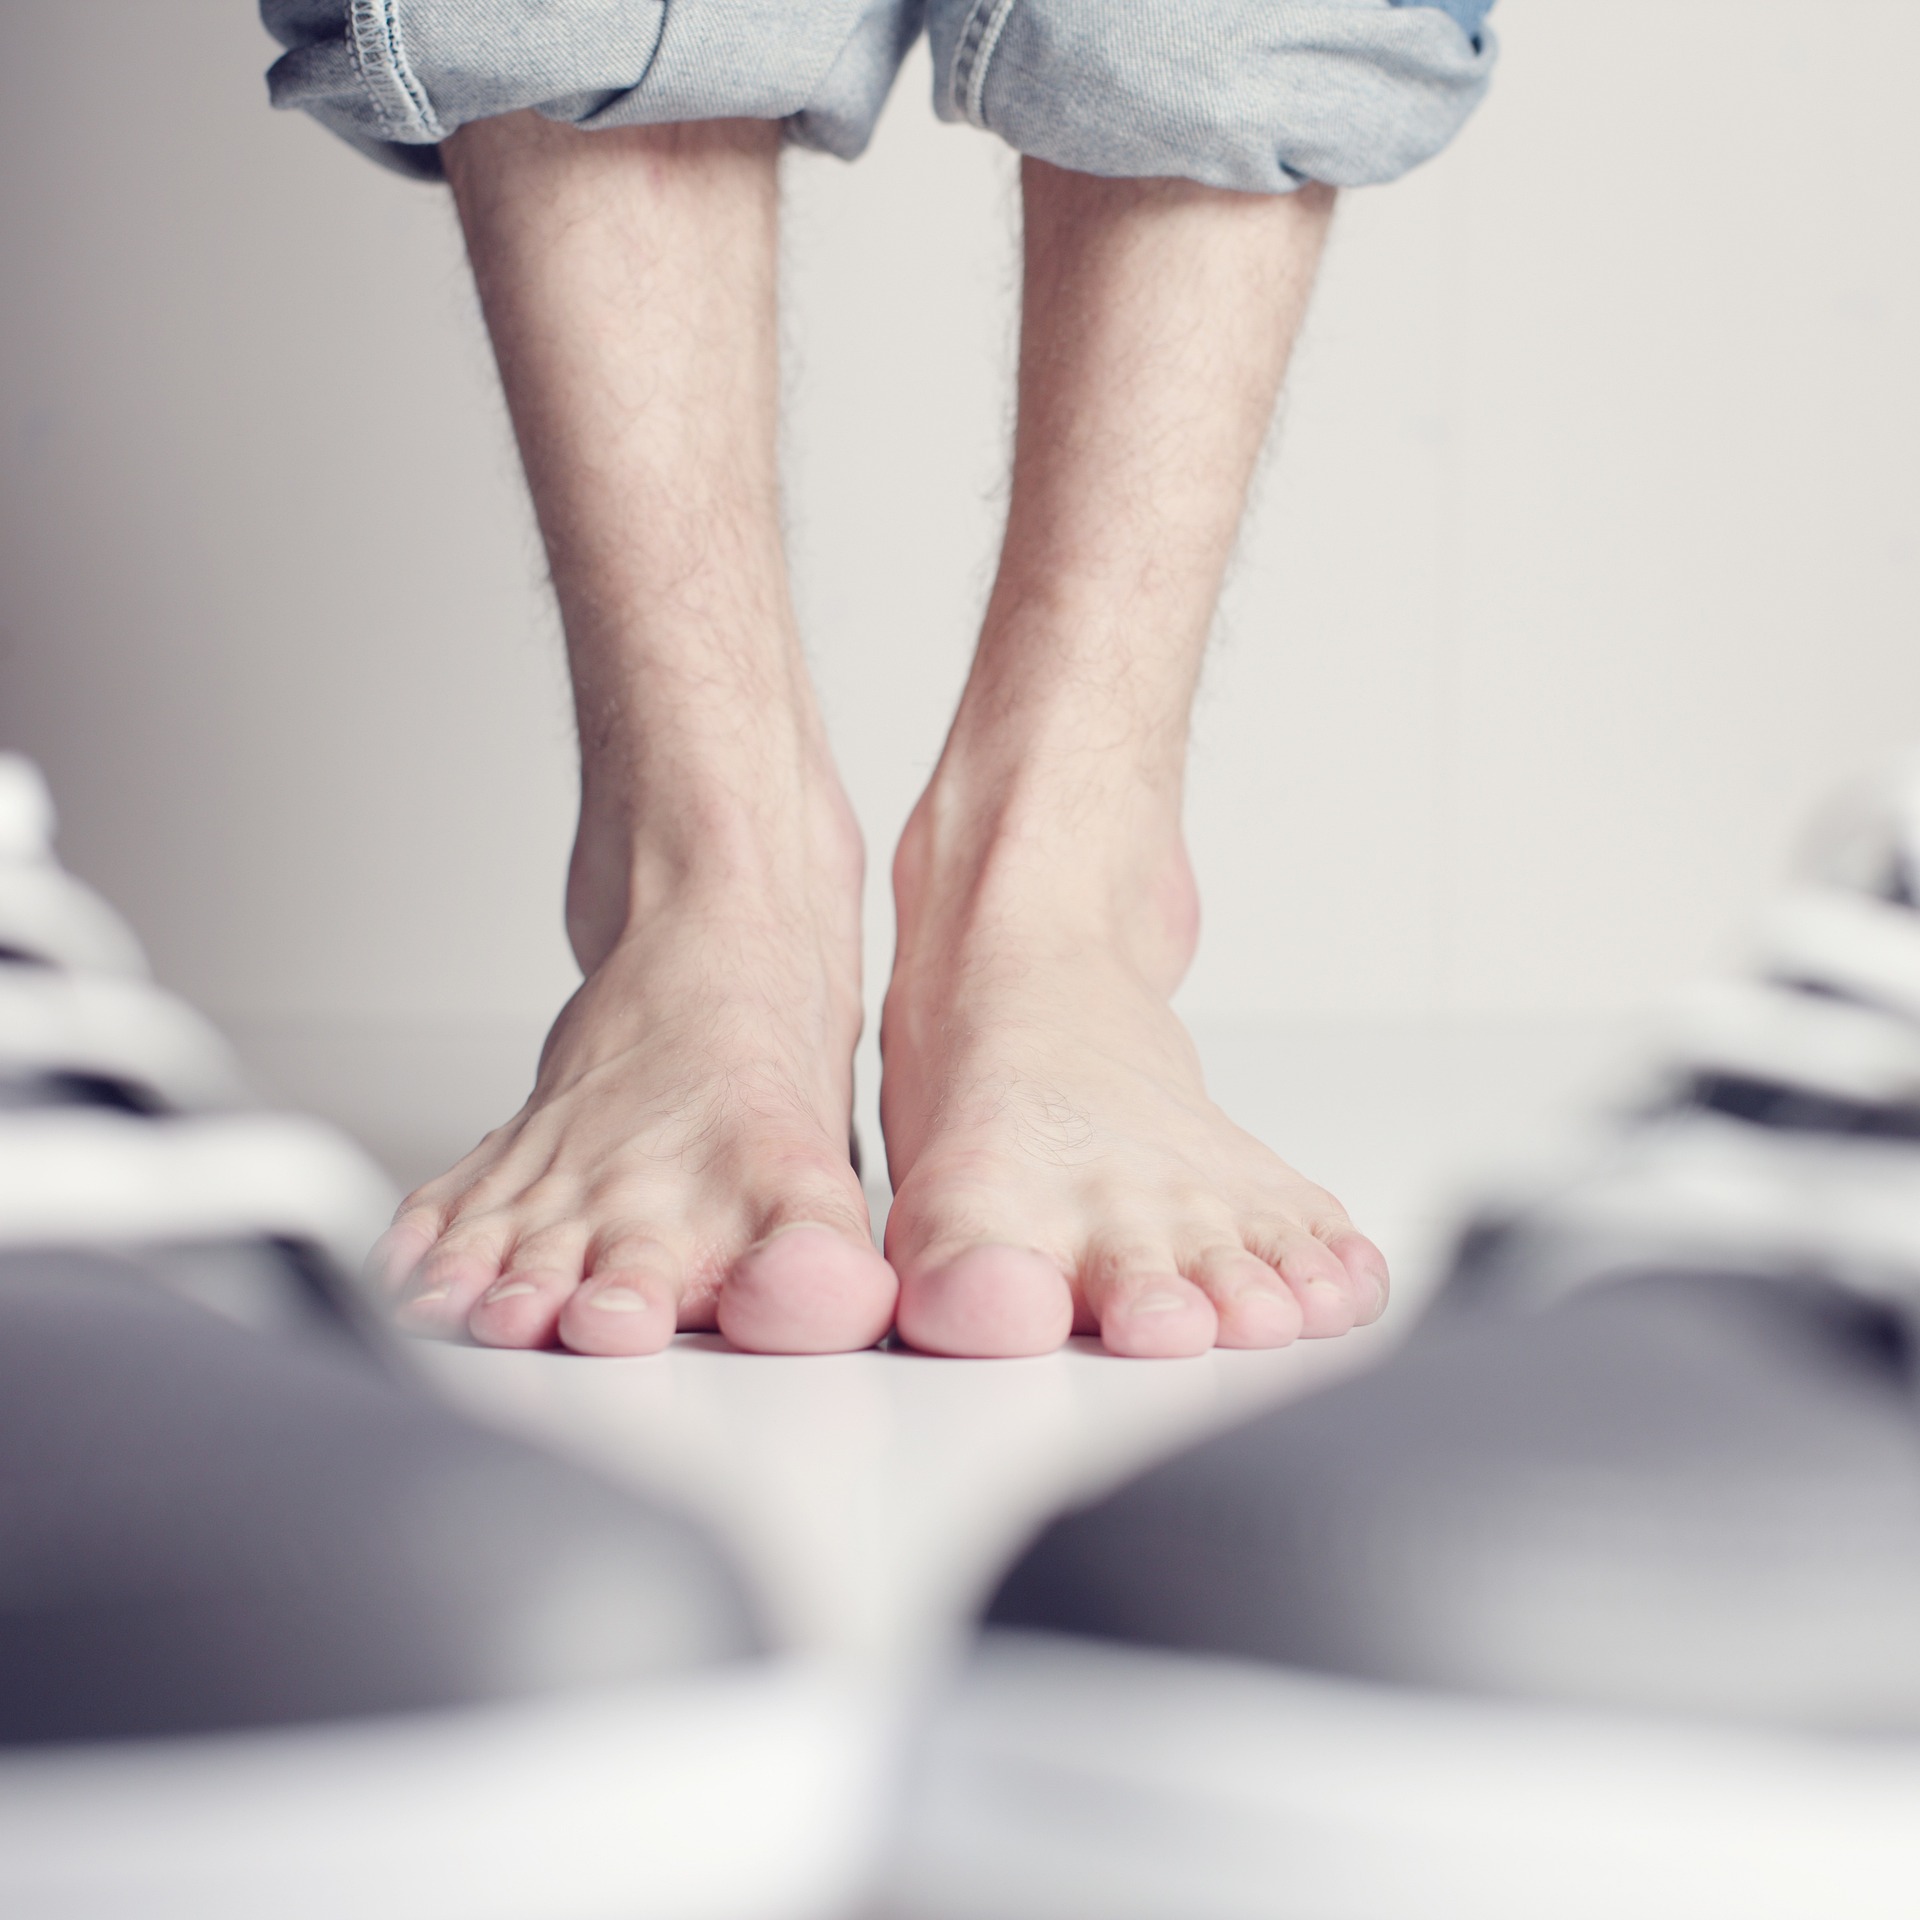 Does Your Heel Hurt in the Morning or Whenever You Stand Up? Here's What You Need to Know